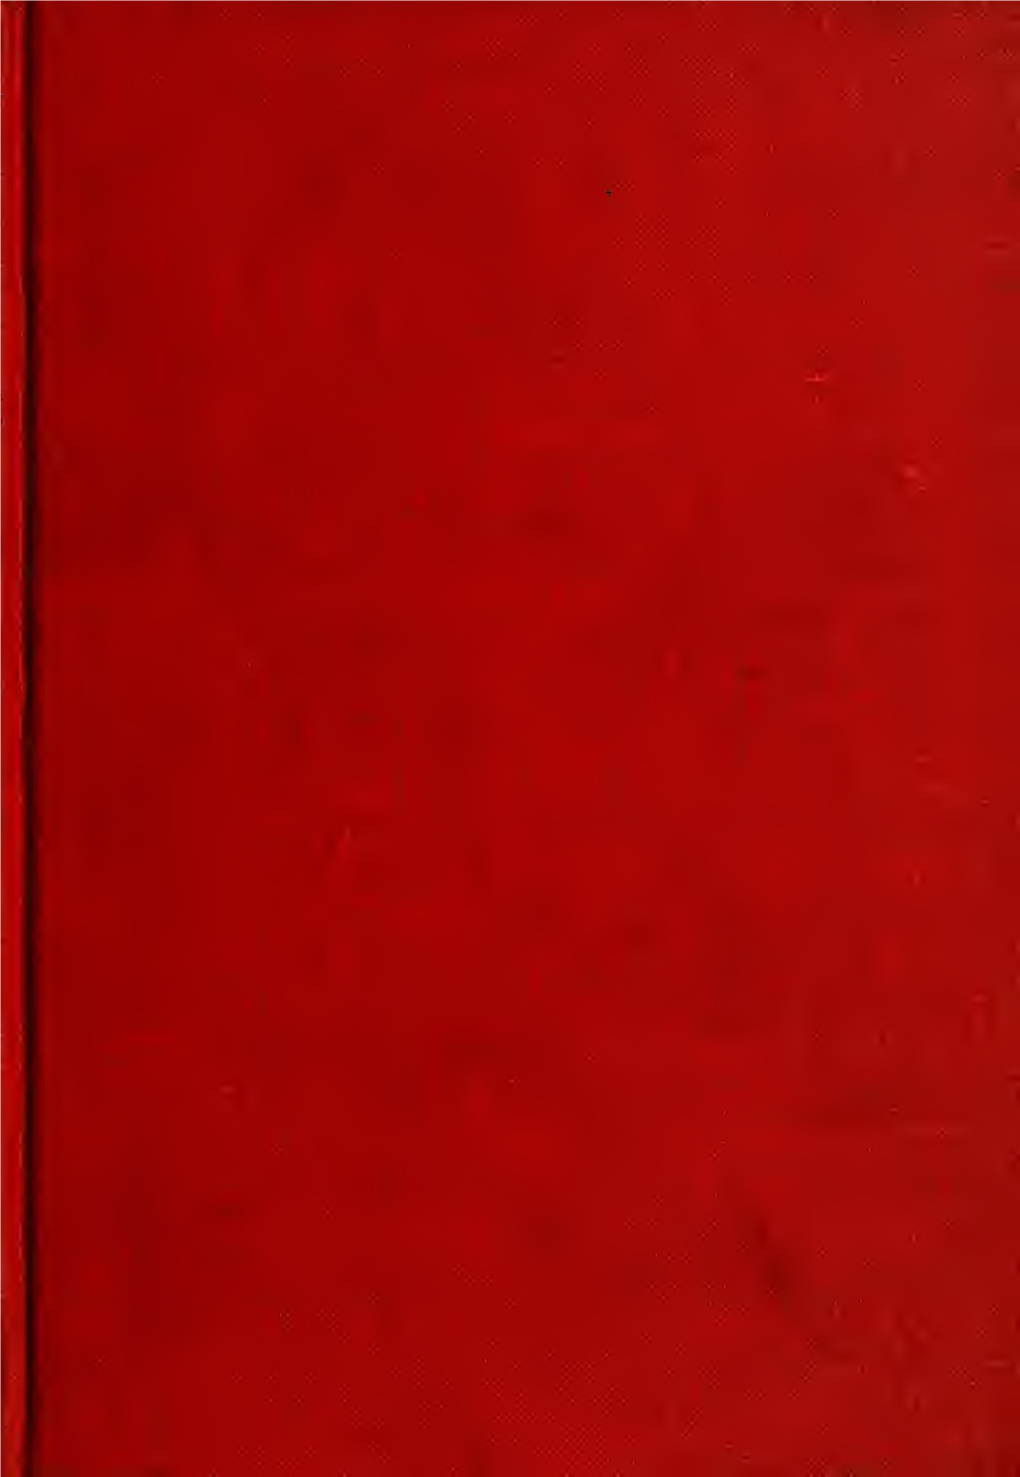 Haverford College Bulletin, New Series, 7-8, 1908-1910